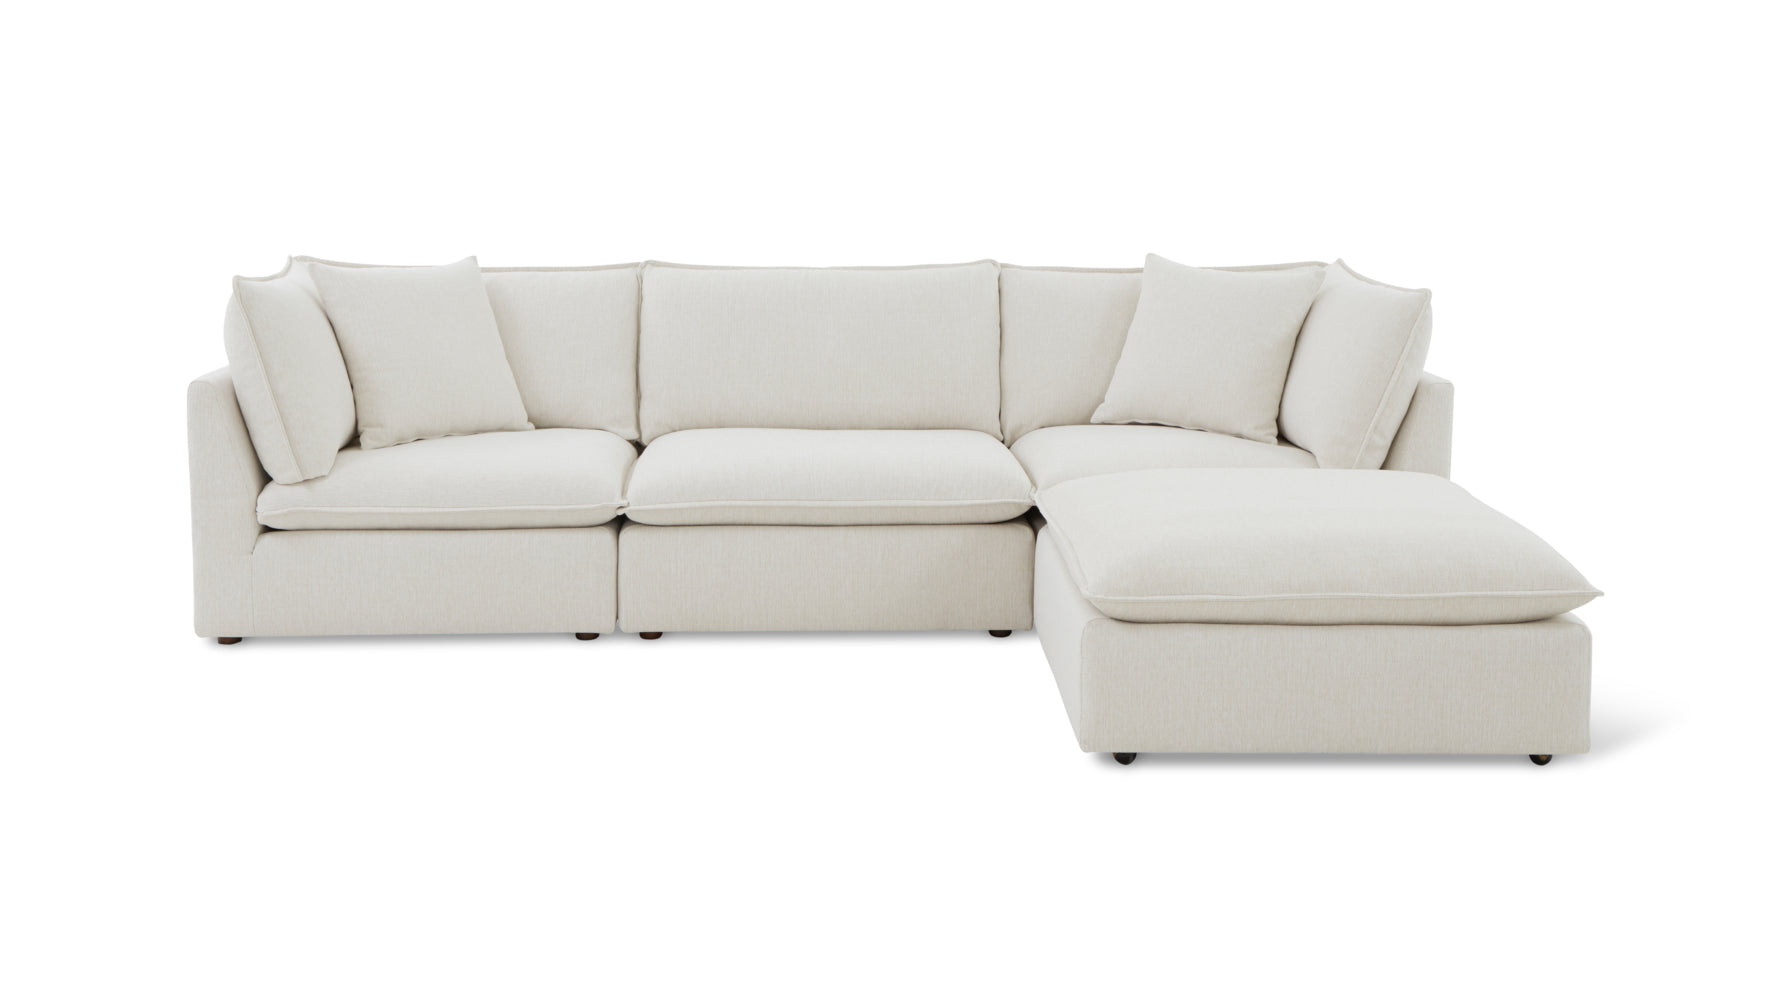 Chill Time 4-Piece Modular Sectional, Birch